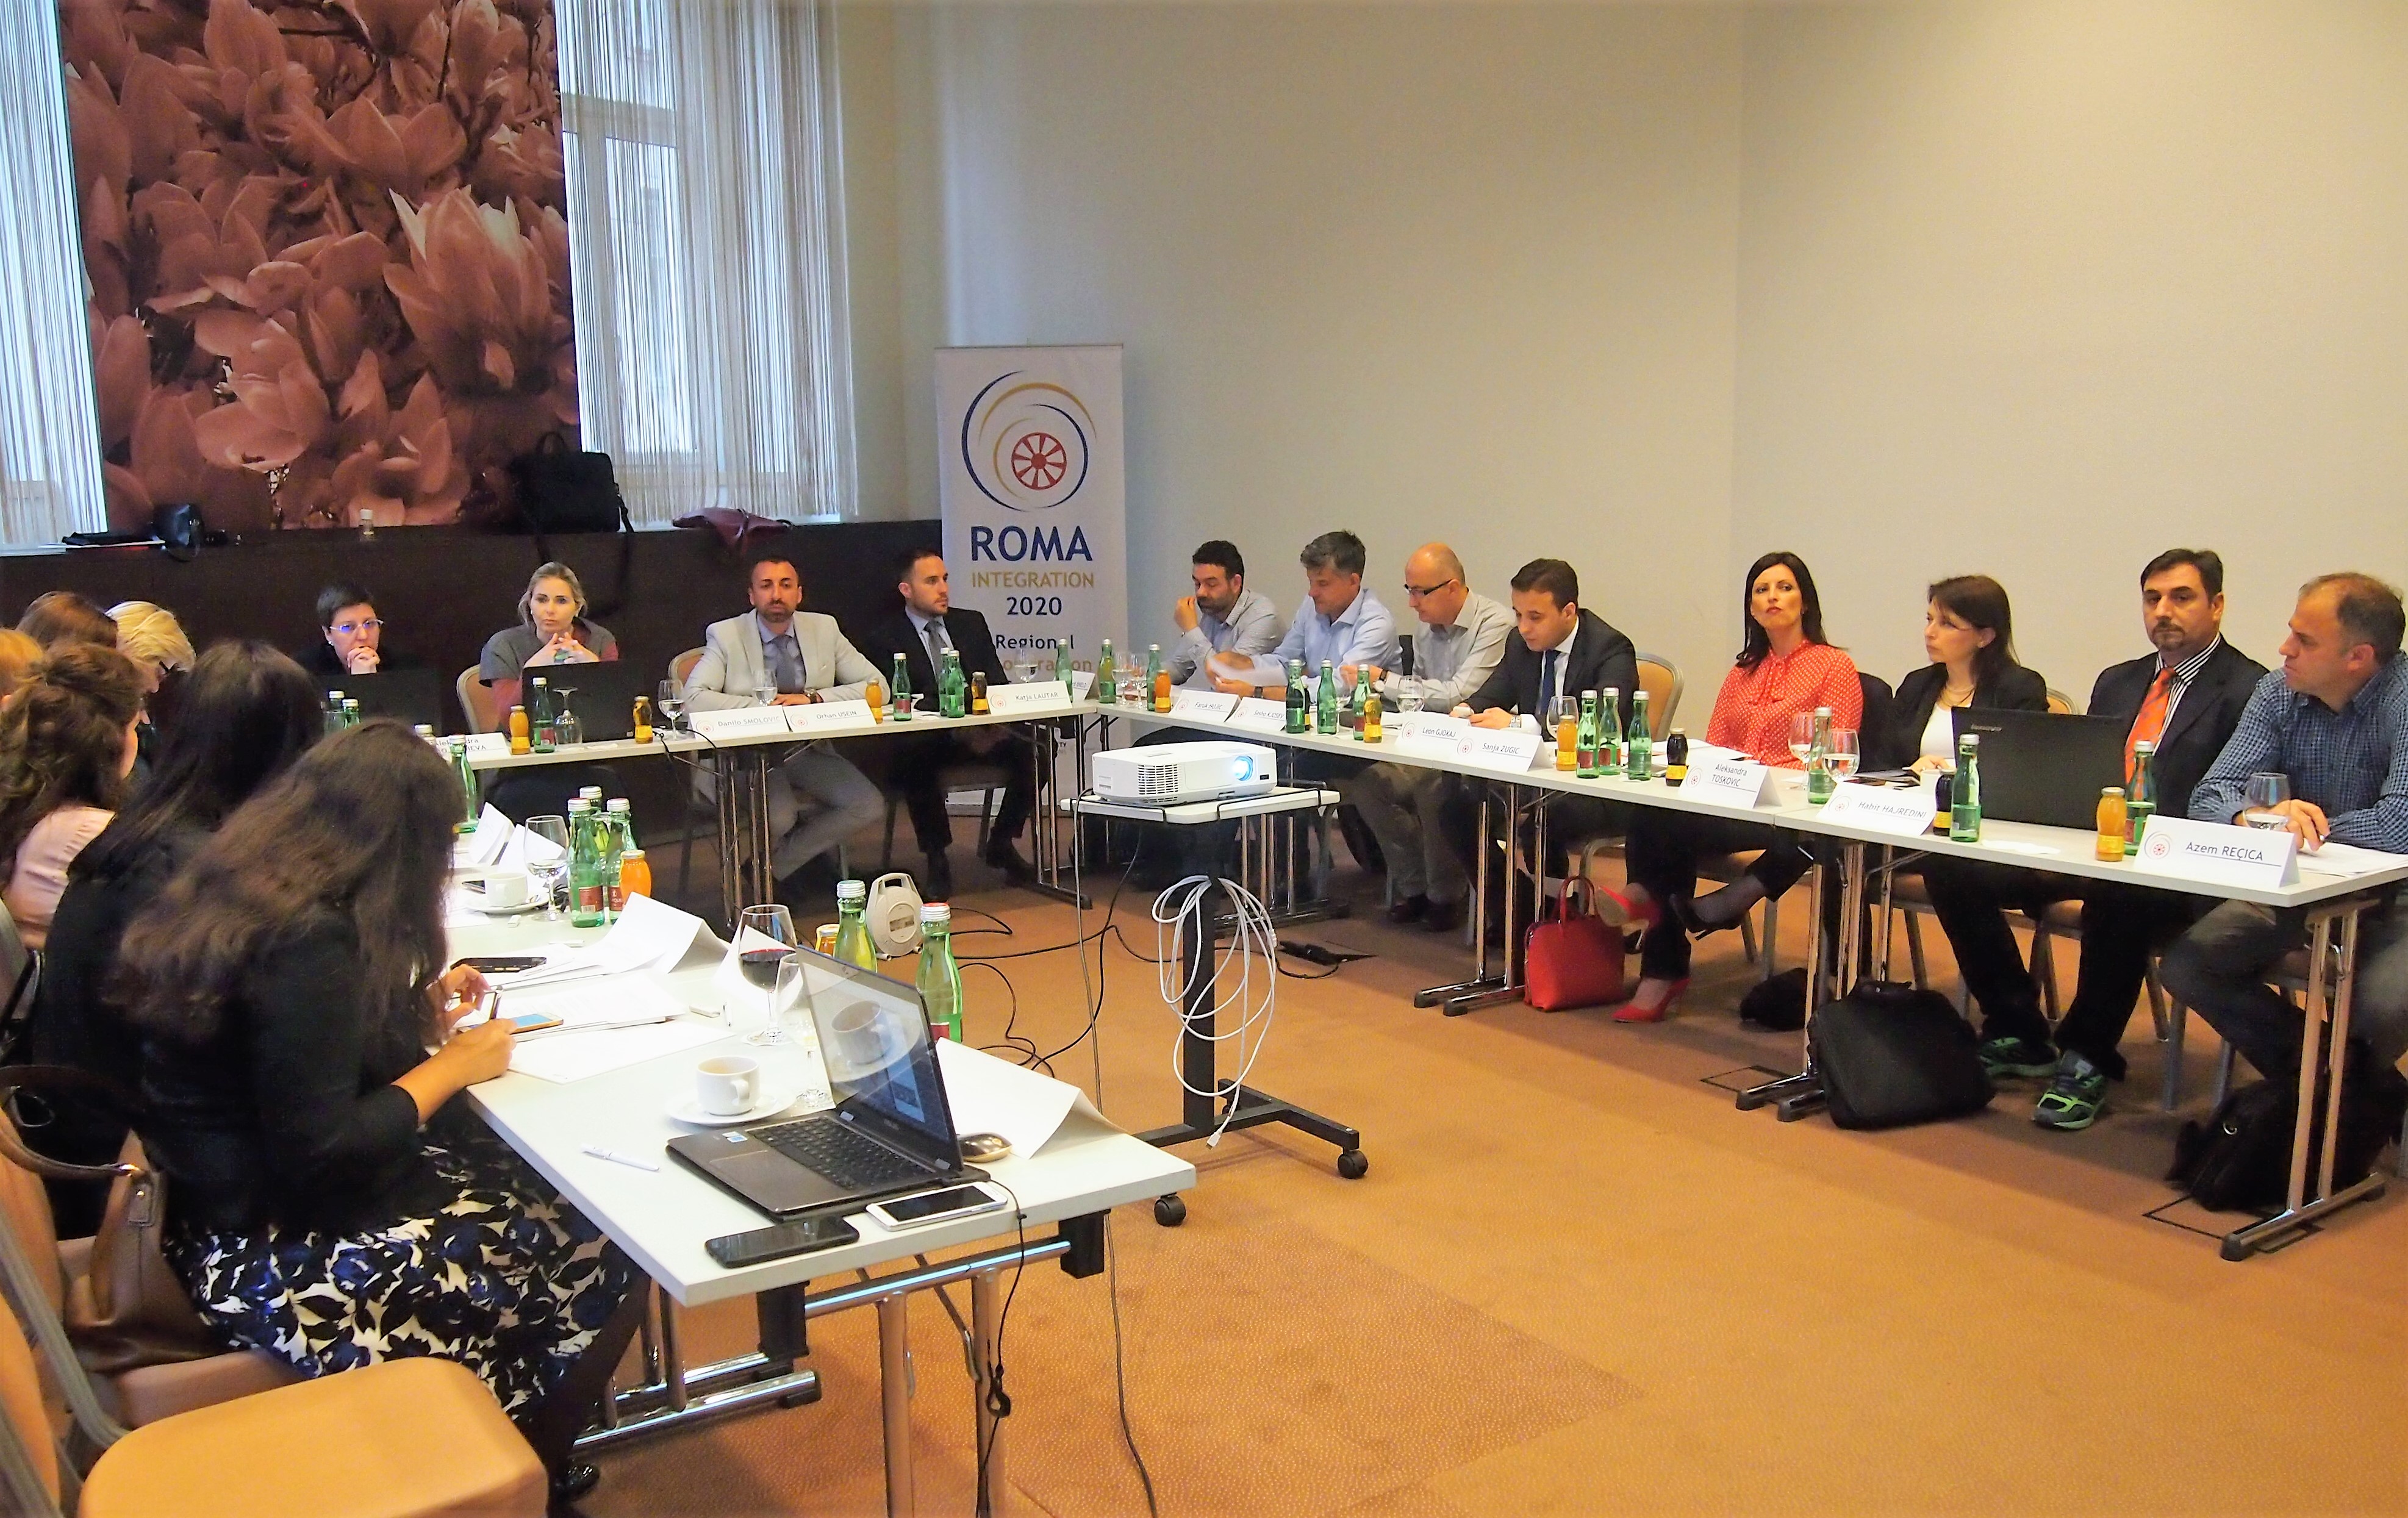 The first meeting of the Working Group for Developing Regional Standards for Roma Responsible Budgeting in Vienna, 26 April 2018 (Photo: RCC/Milica Grahovac)